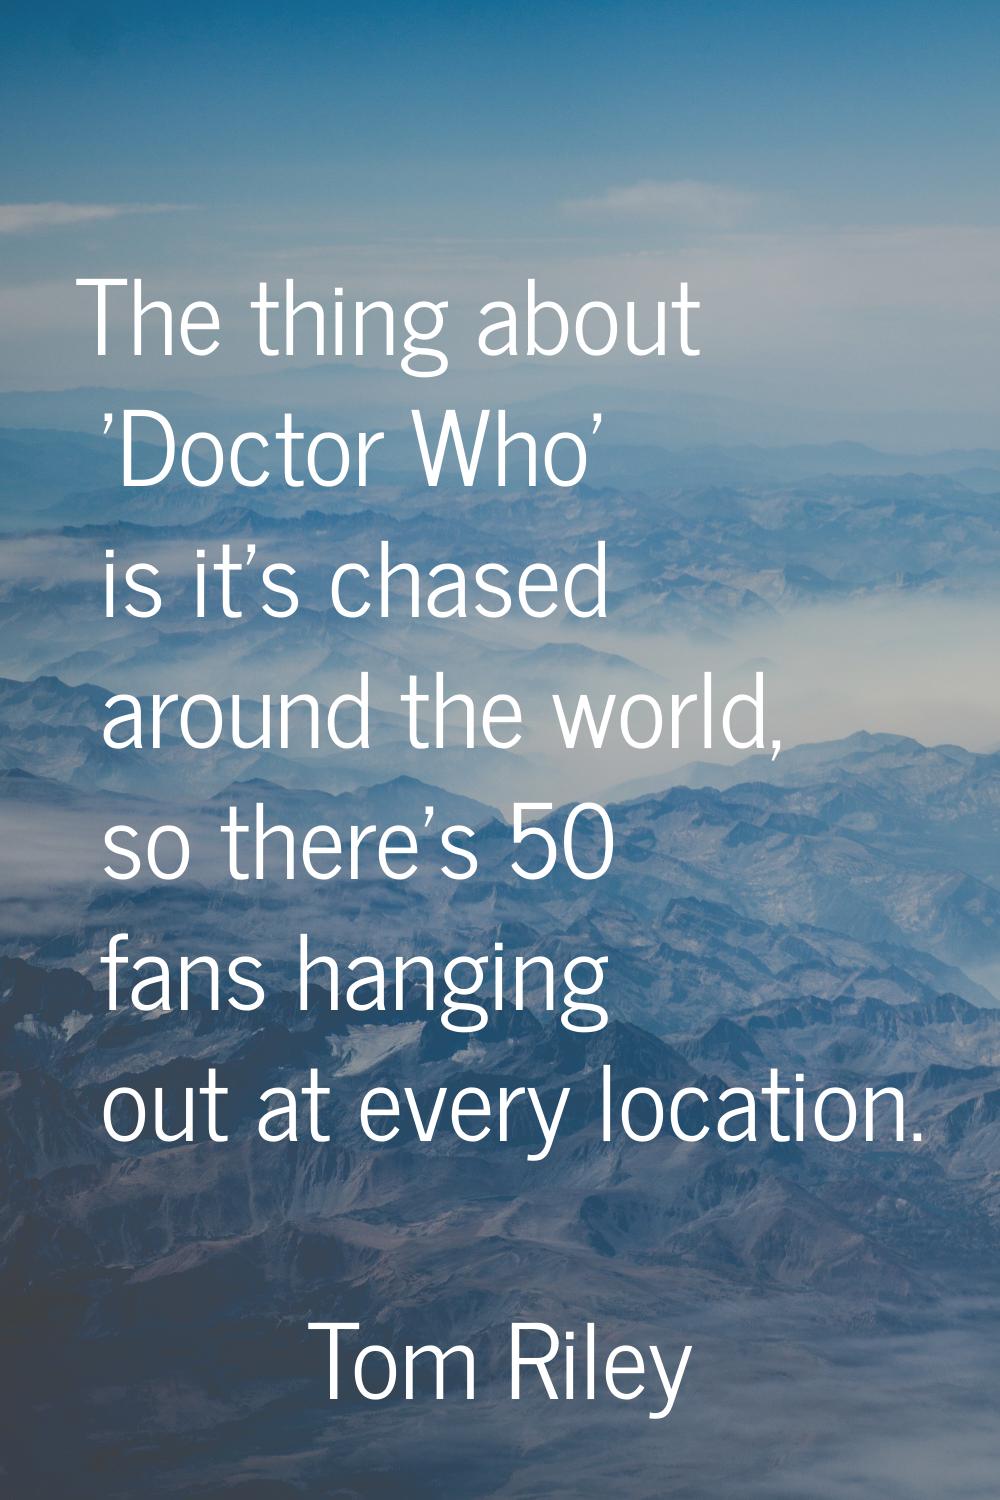 The thing about 'Doctor Who' is it's chased around the world, so there's 50 fans hanging out at eve